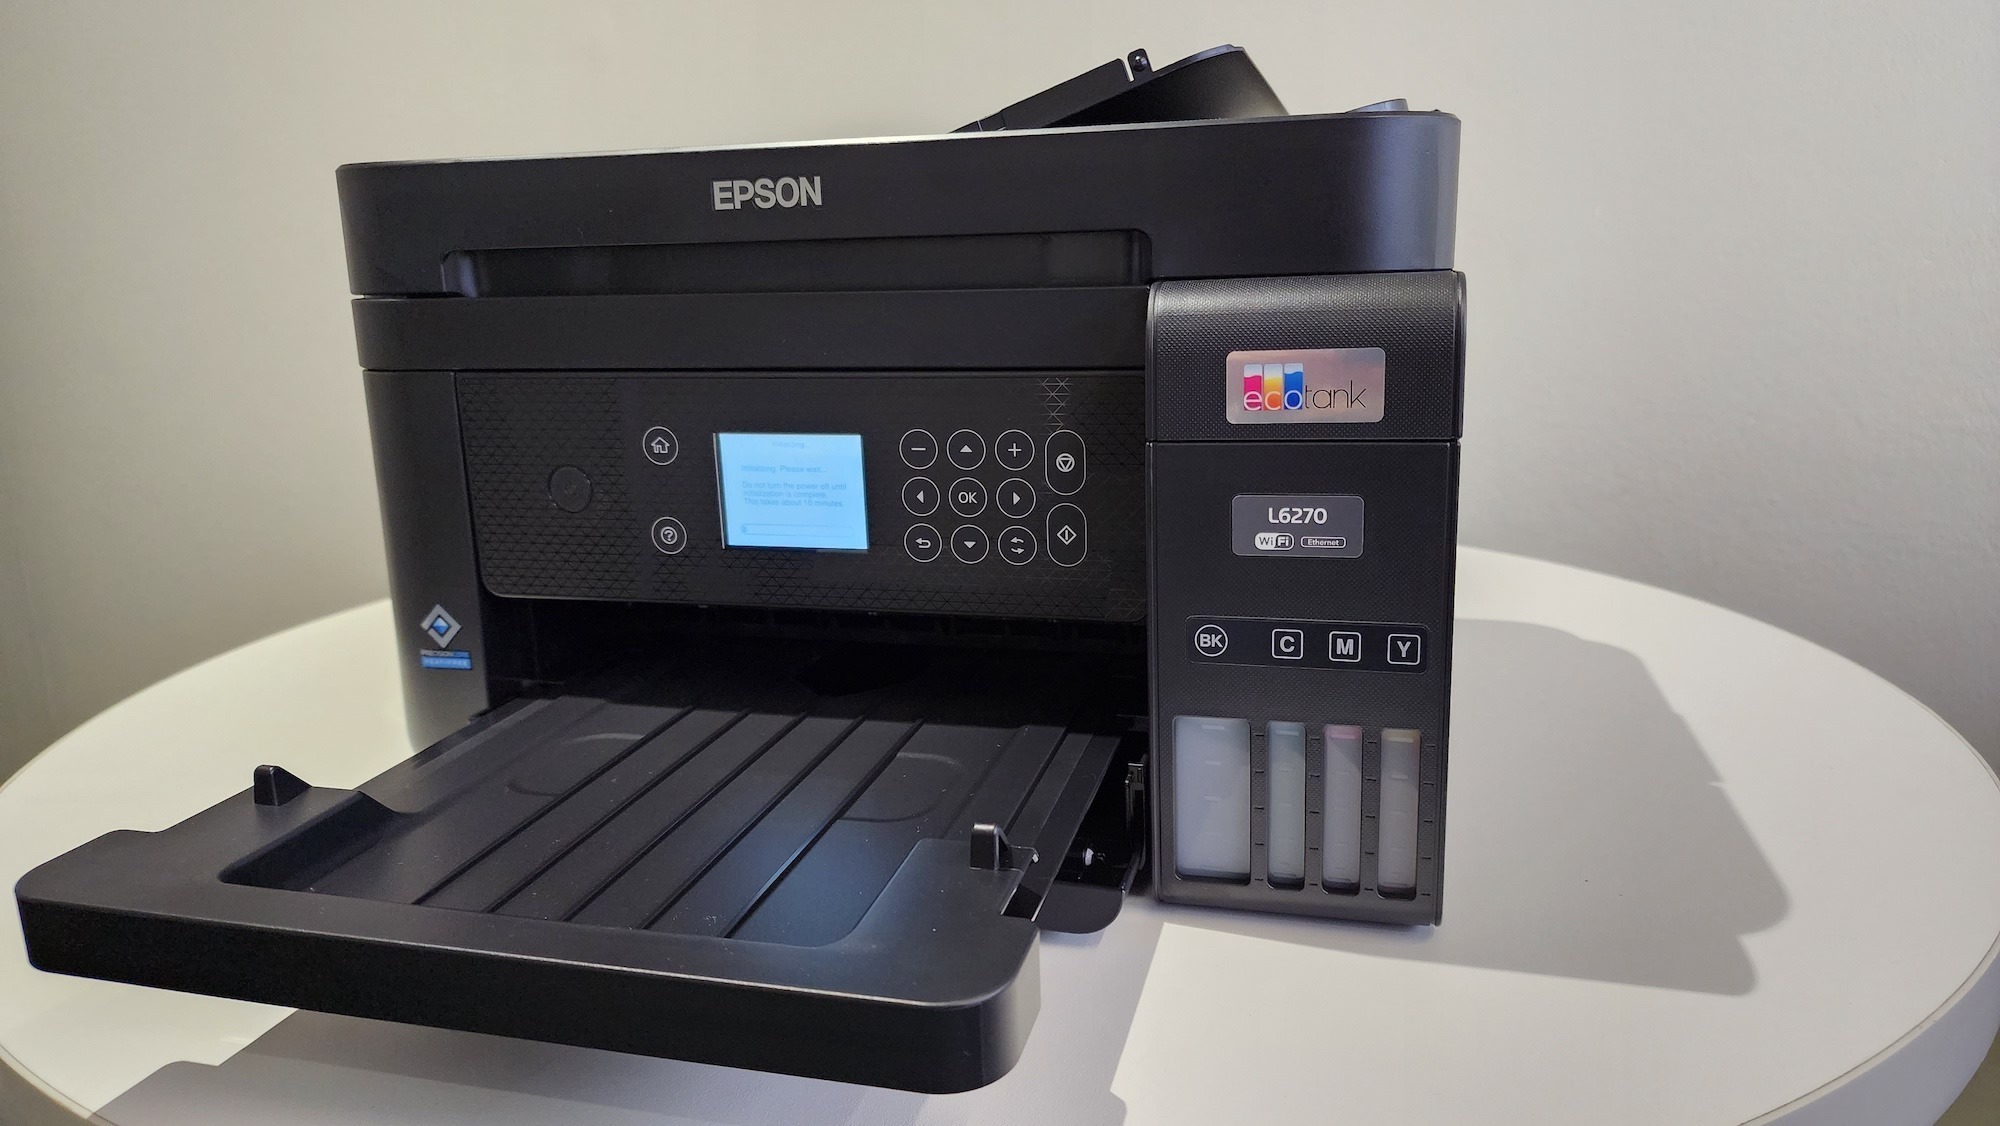 Epson Ecotank Multifunction Printer Review - Take It Home With - Stuff South